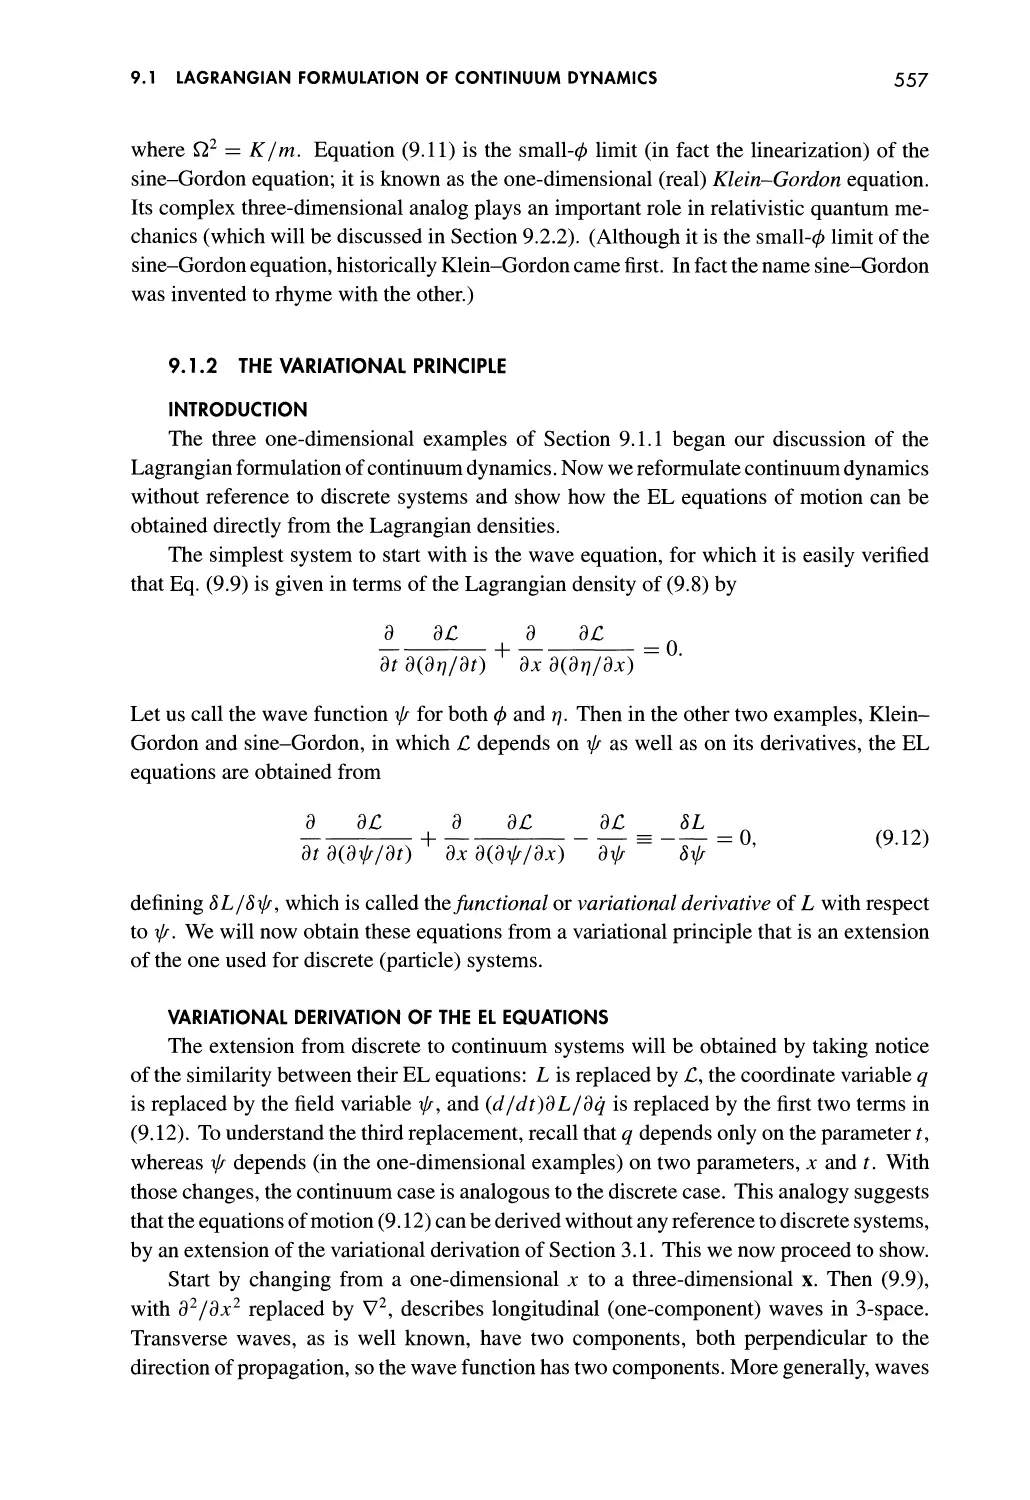 9.1.2 The Variational Principle
Variational Derivation of the EL Equations